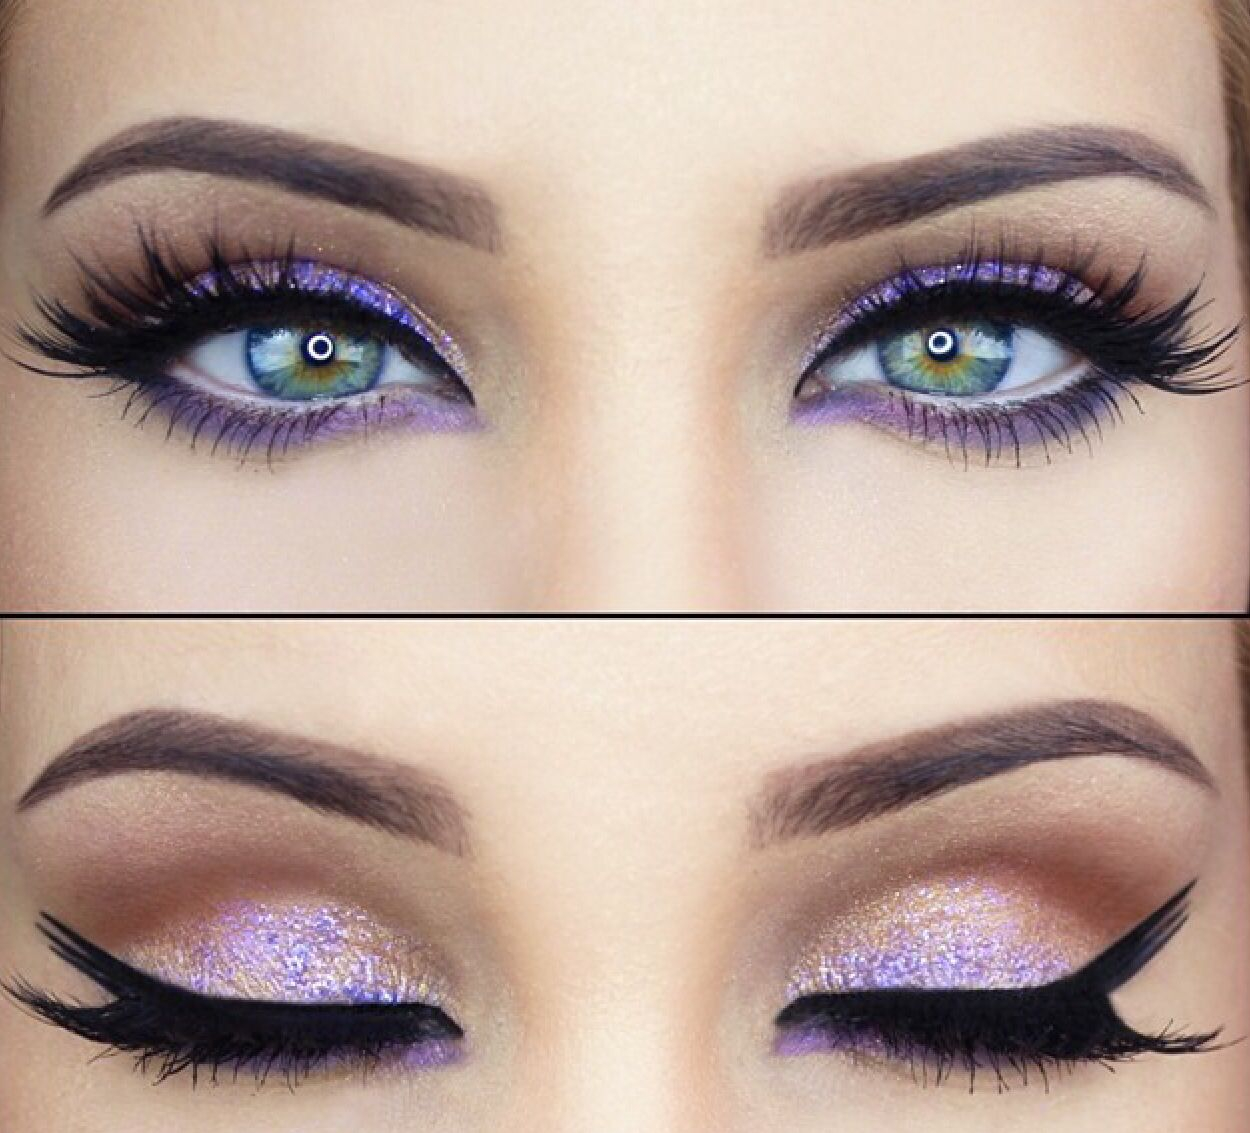 Best Eye Makeup For Green Eyes Stunning Green Eyes Are Complimented And Best Suited To Purple